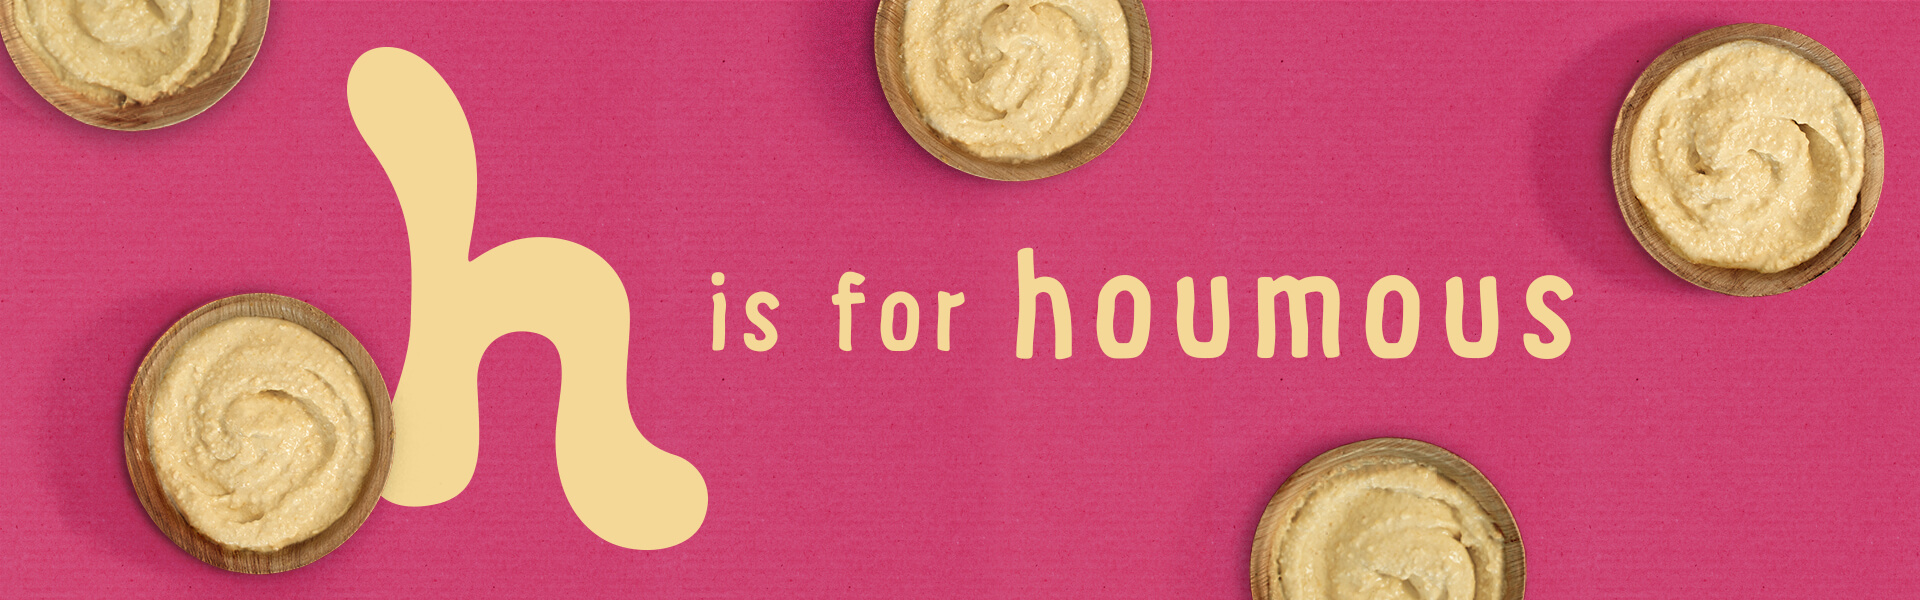 Organix h is for houmous